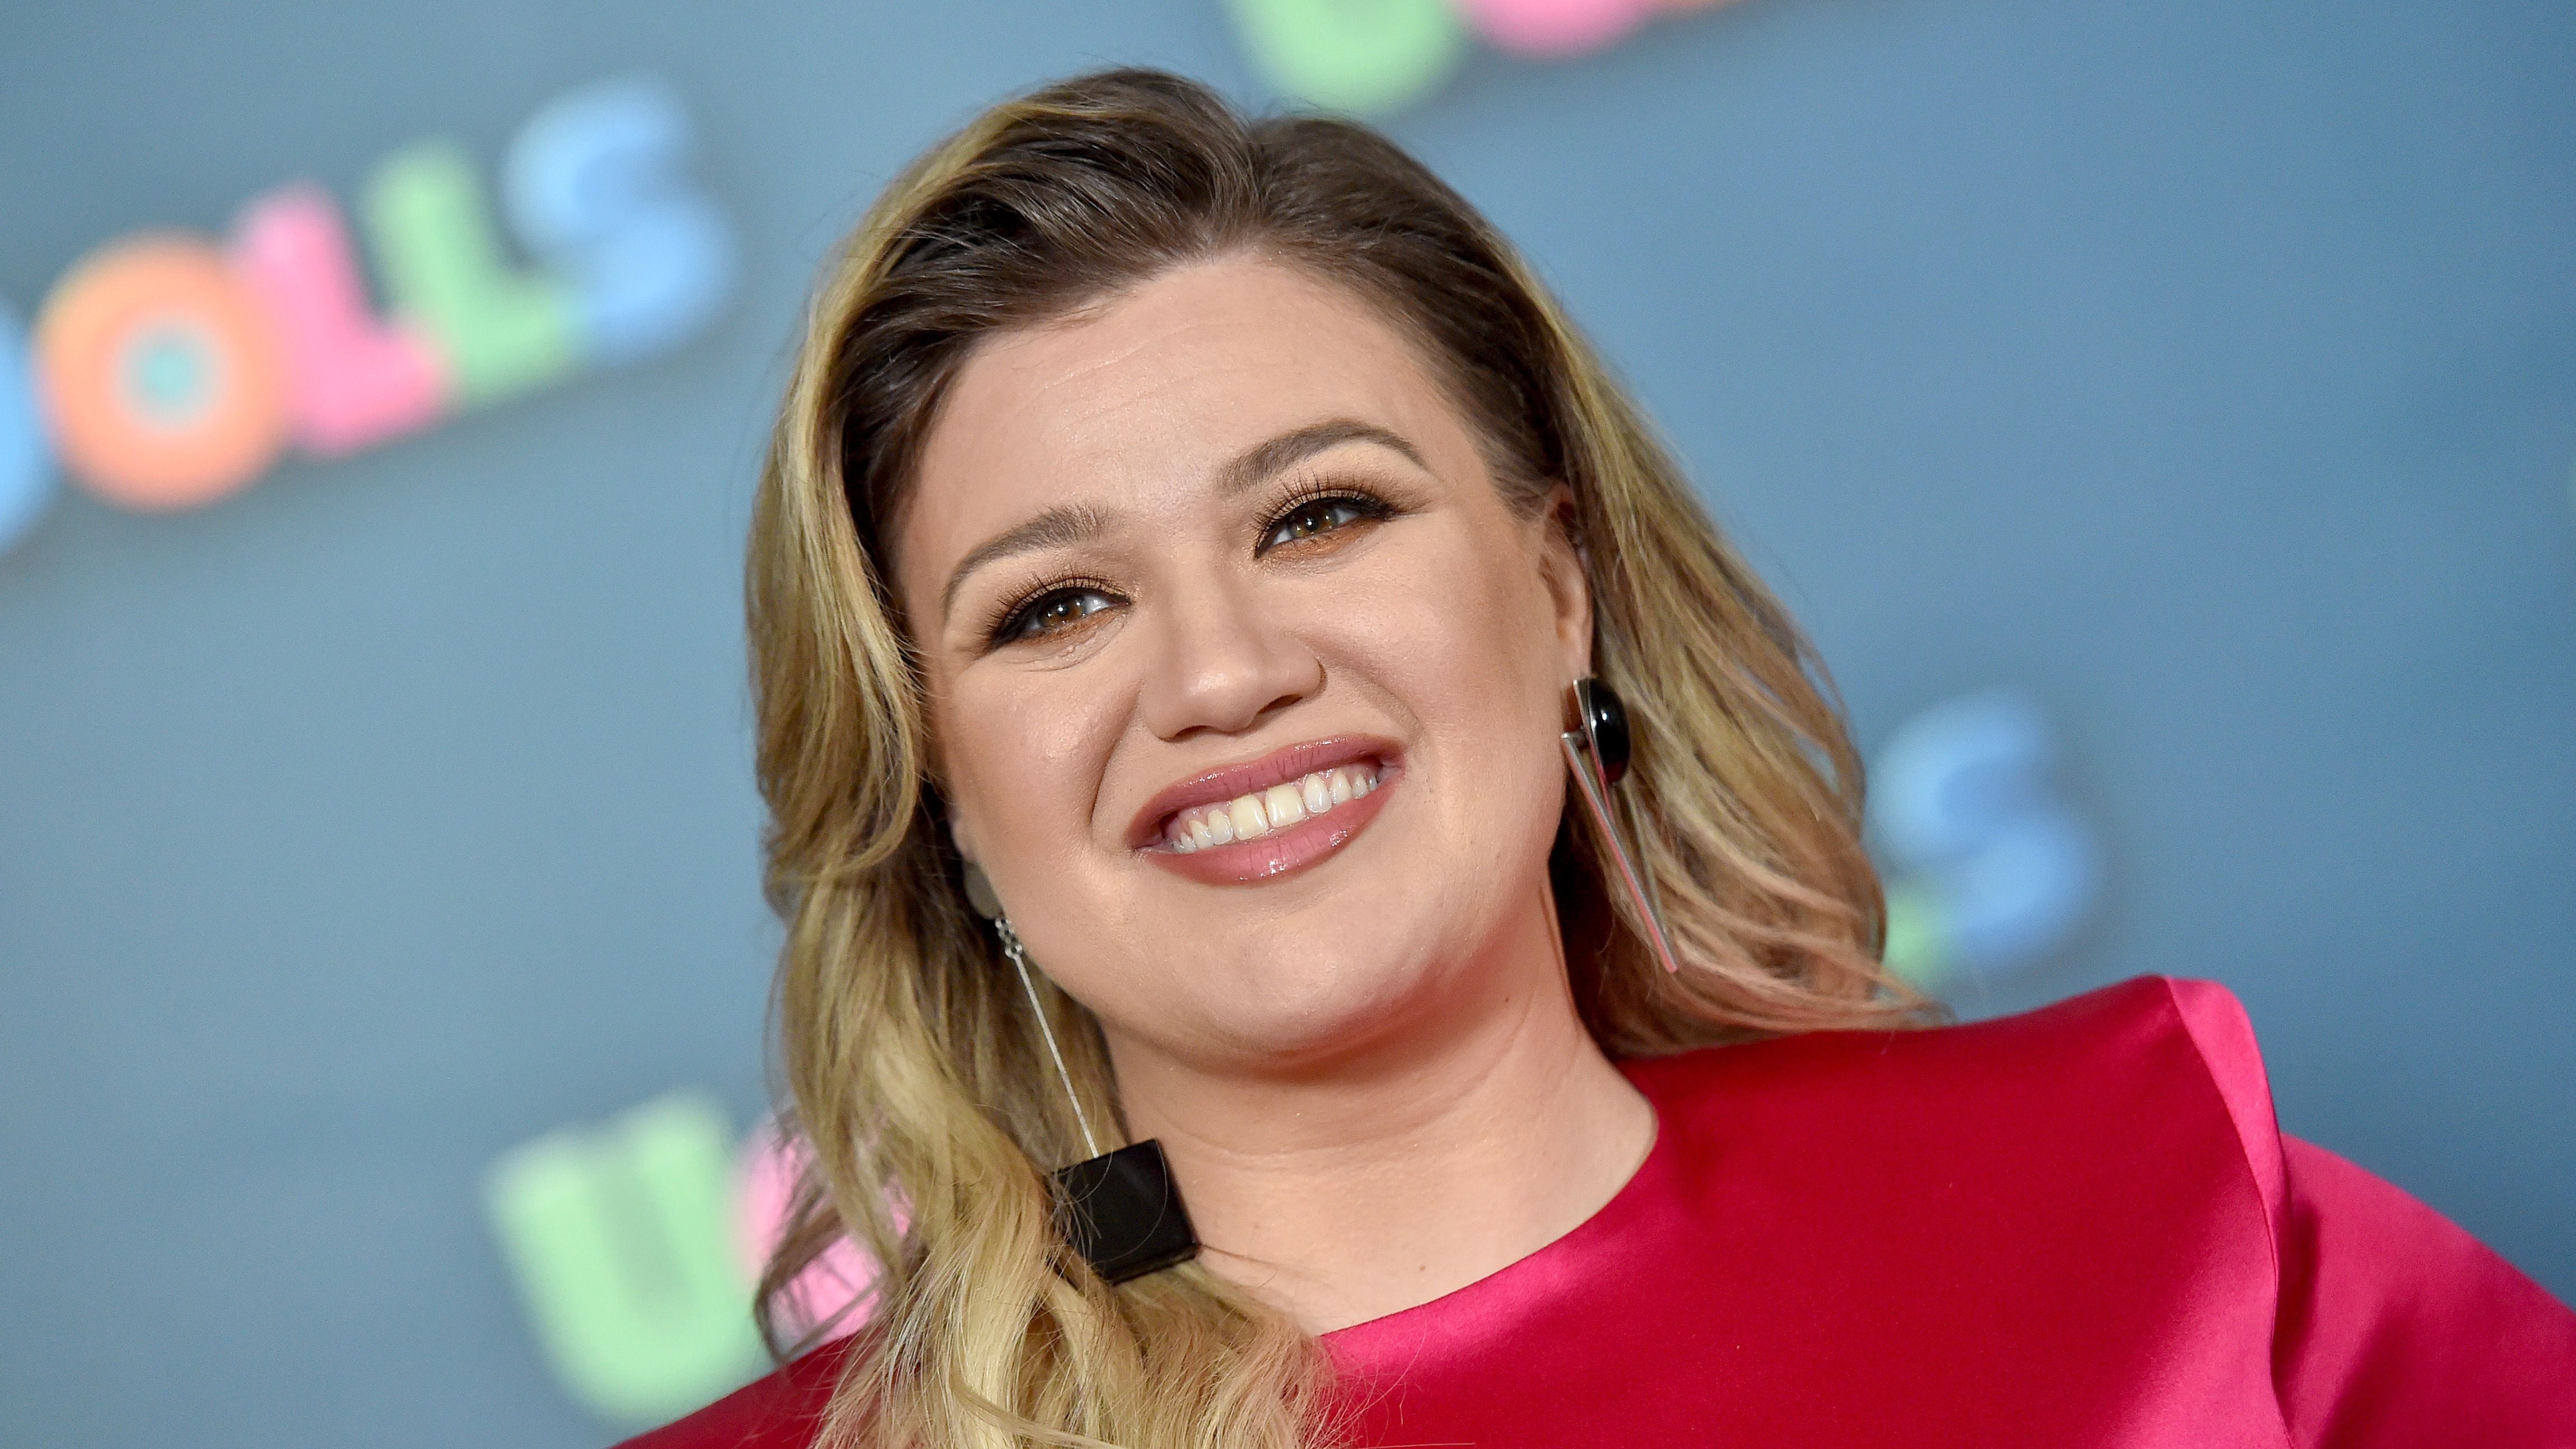 Kelly Clarkson Just Dropped Big News on Instagram and Fans Are